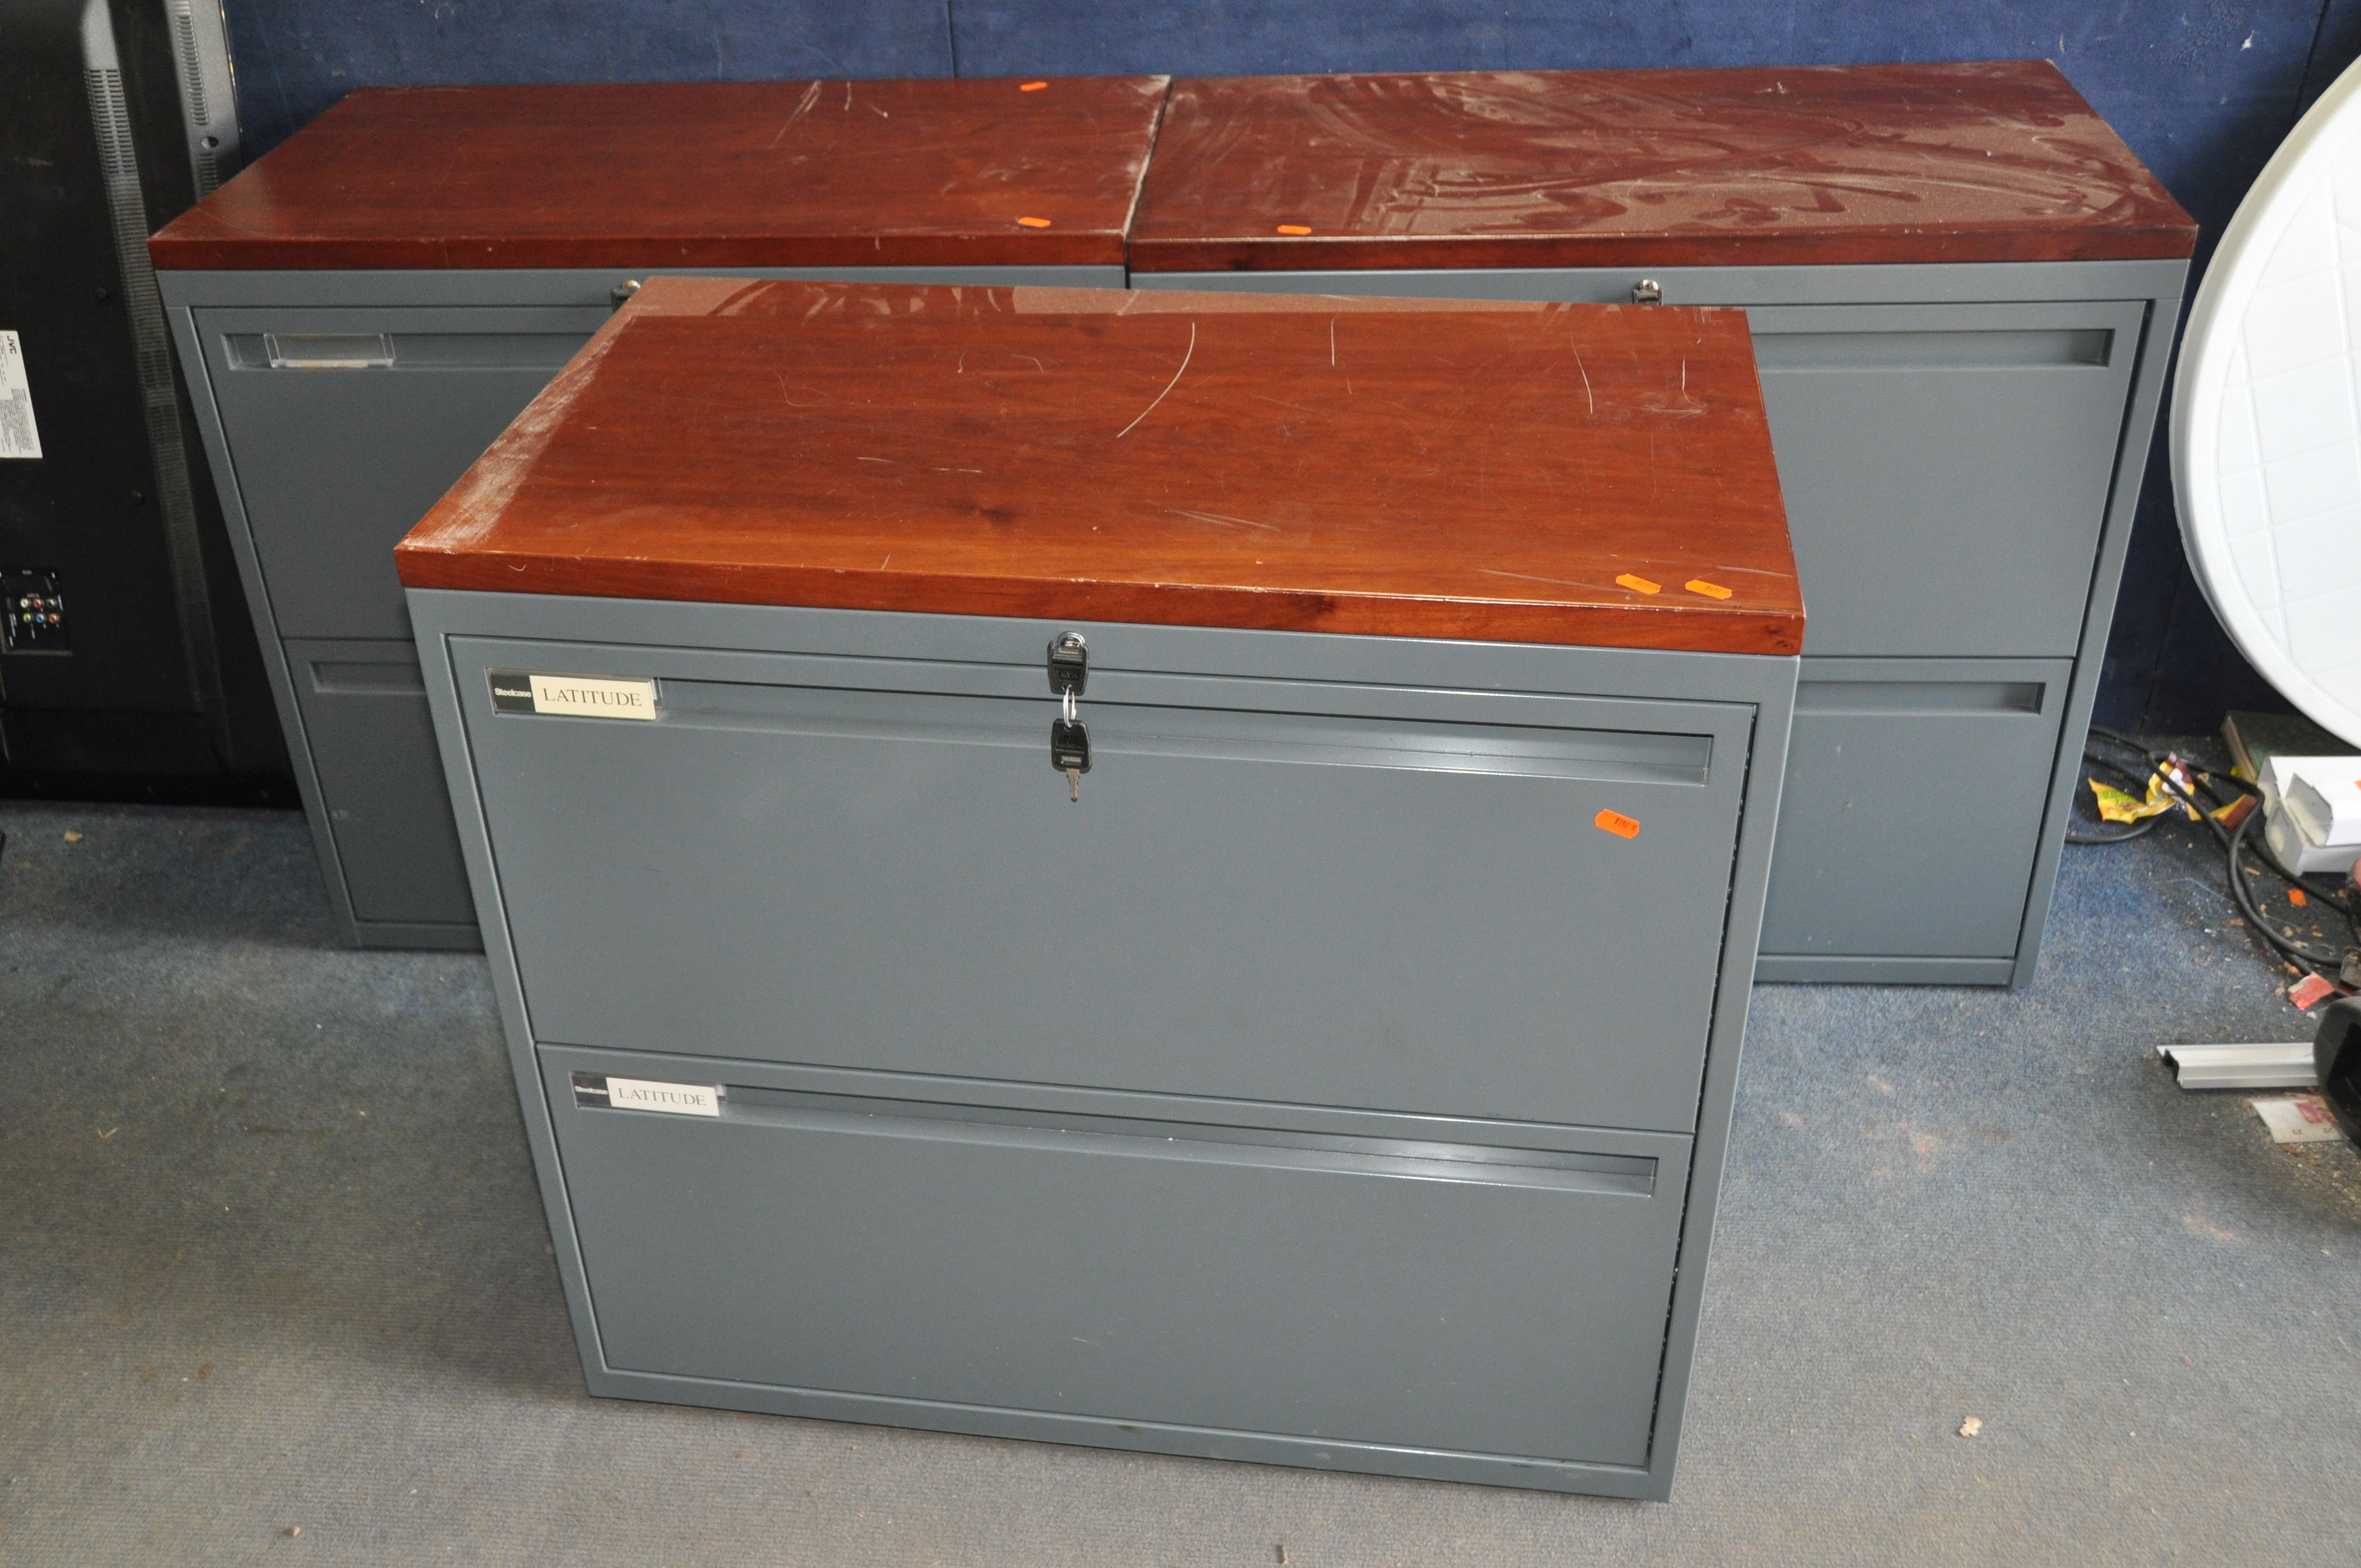 THREE 'STEELCASE LATTITUDE' METAL OFFICE FILE DRAWERS with two drawers to each, a Cherrywood